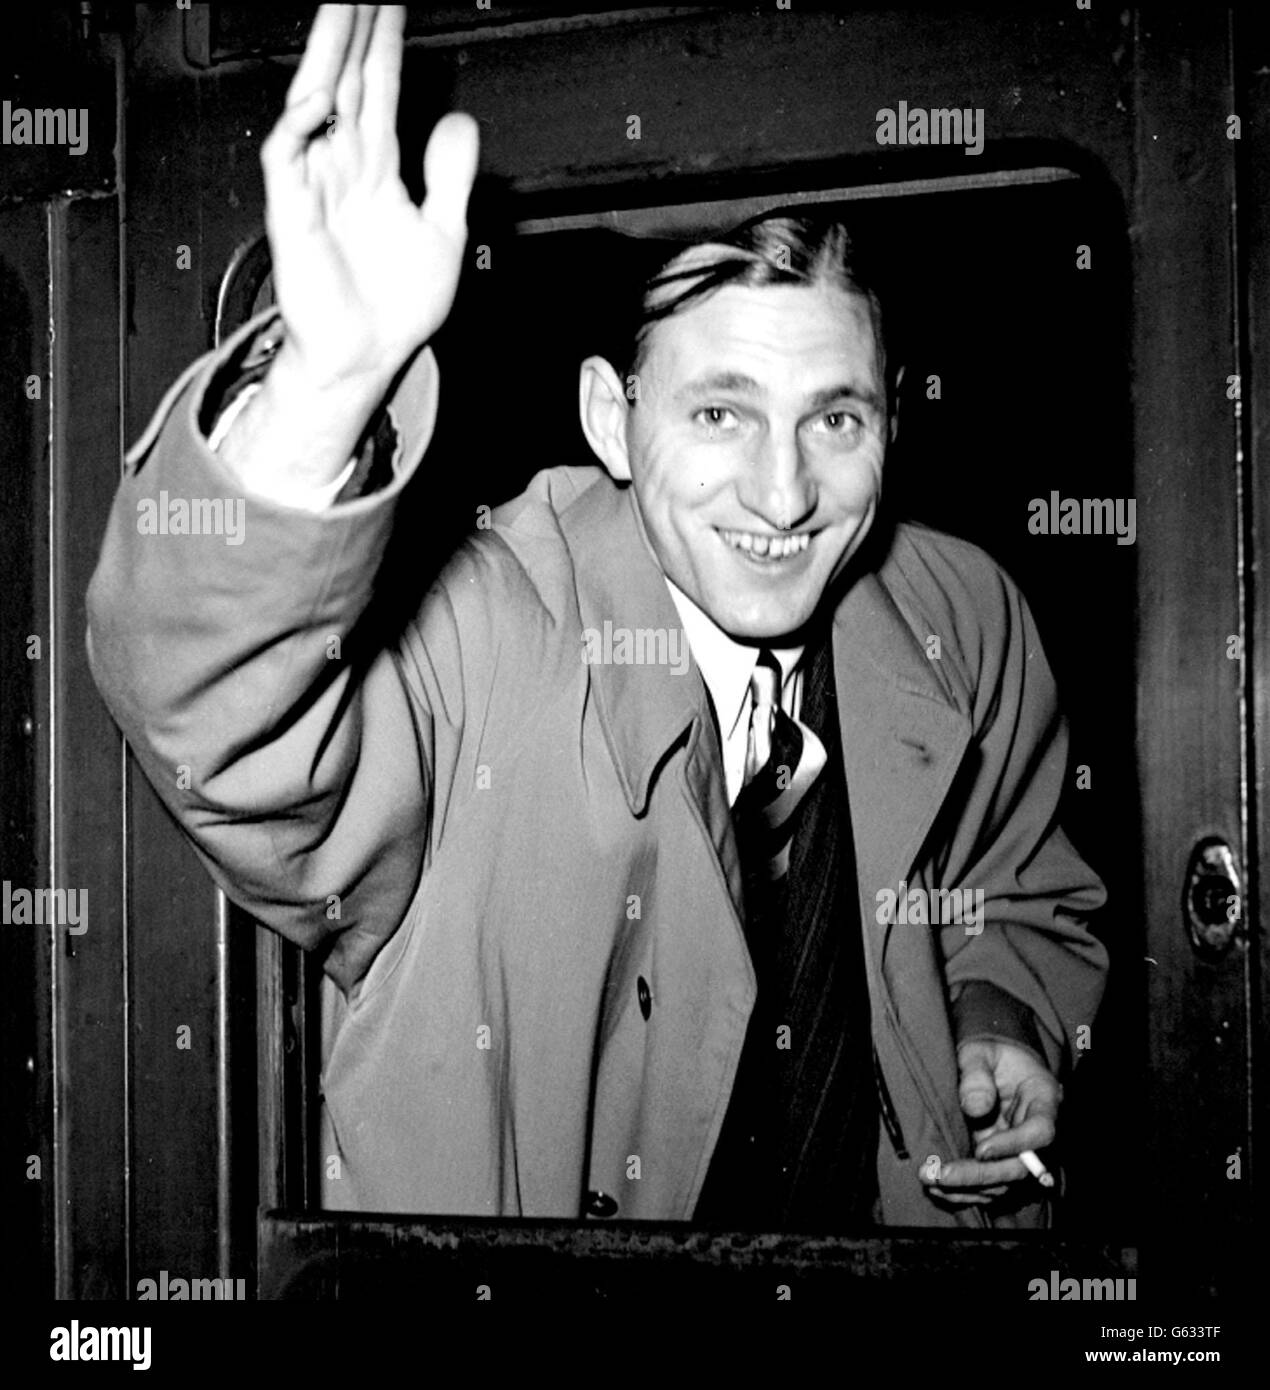 For the third time since the war a M.C.C. team left for a Test tour, this time against South Africa. Len Hutton, the Yorkshire player, waving a cheery farewell from the boat-train at Waterloo station before the M.C.C. Team left for Southampton. Stock Photo